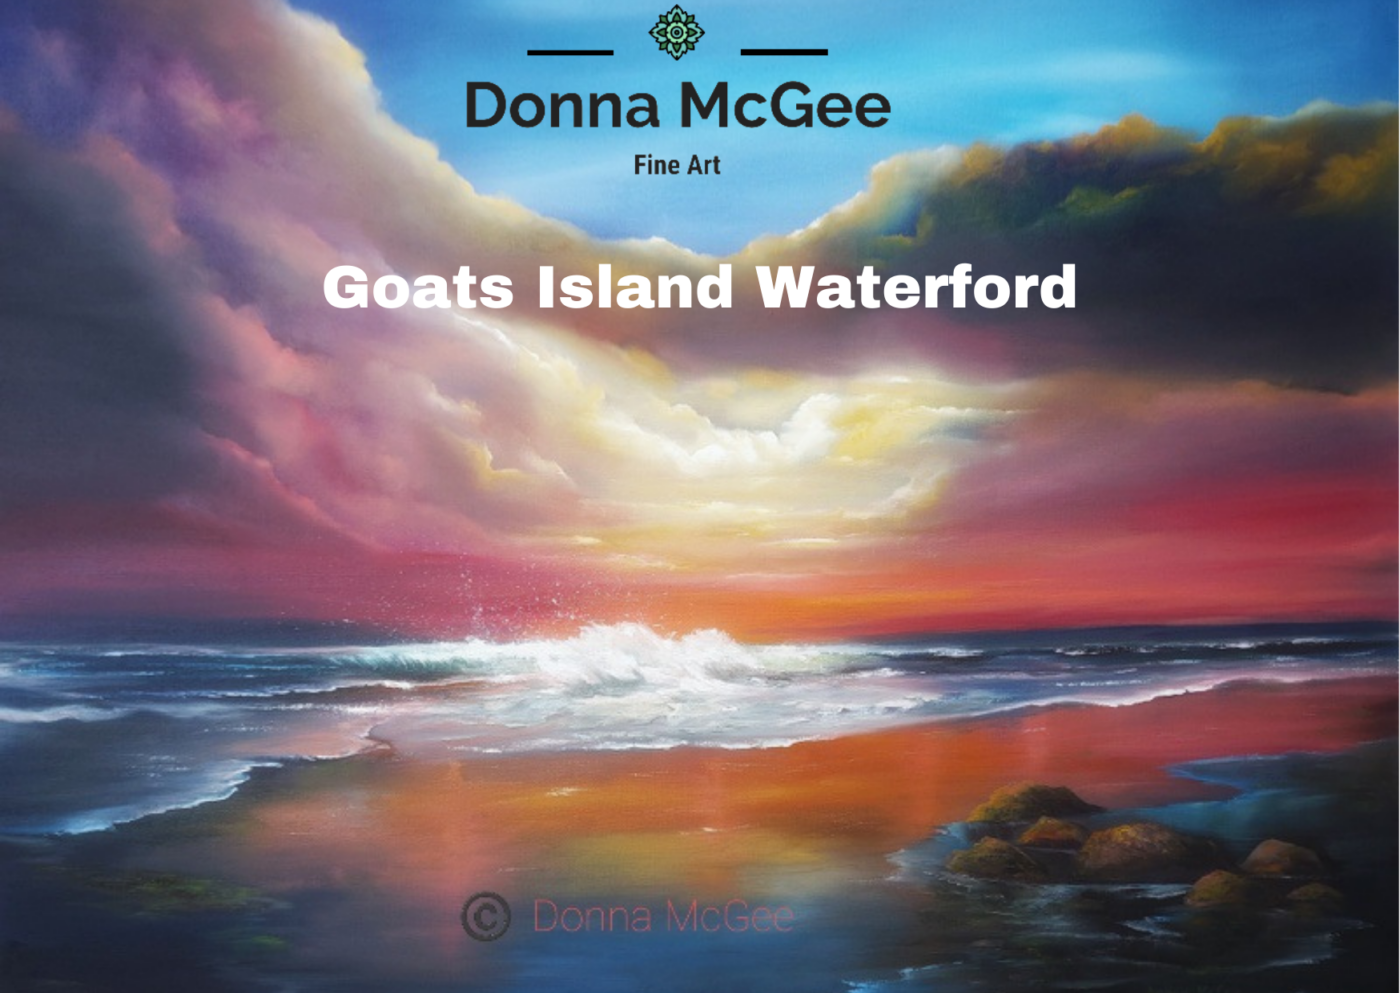 Goats Island Waterford